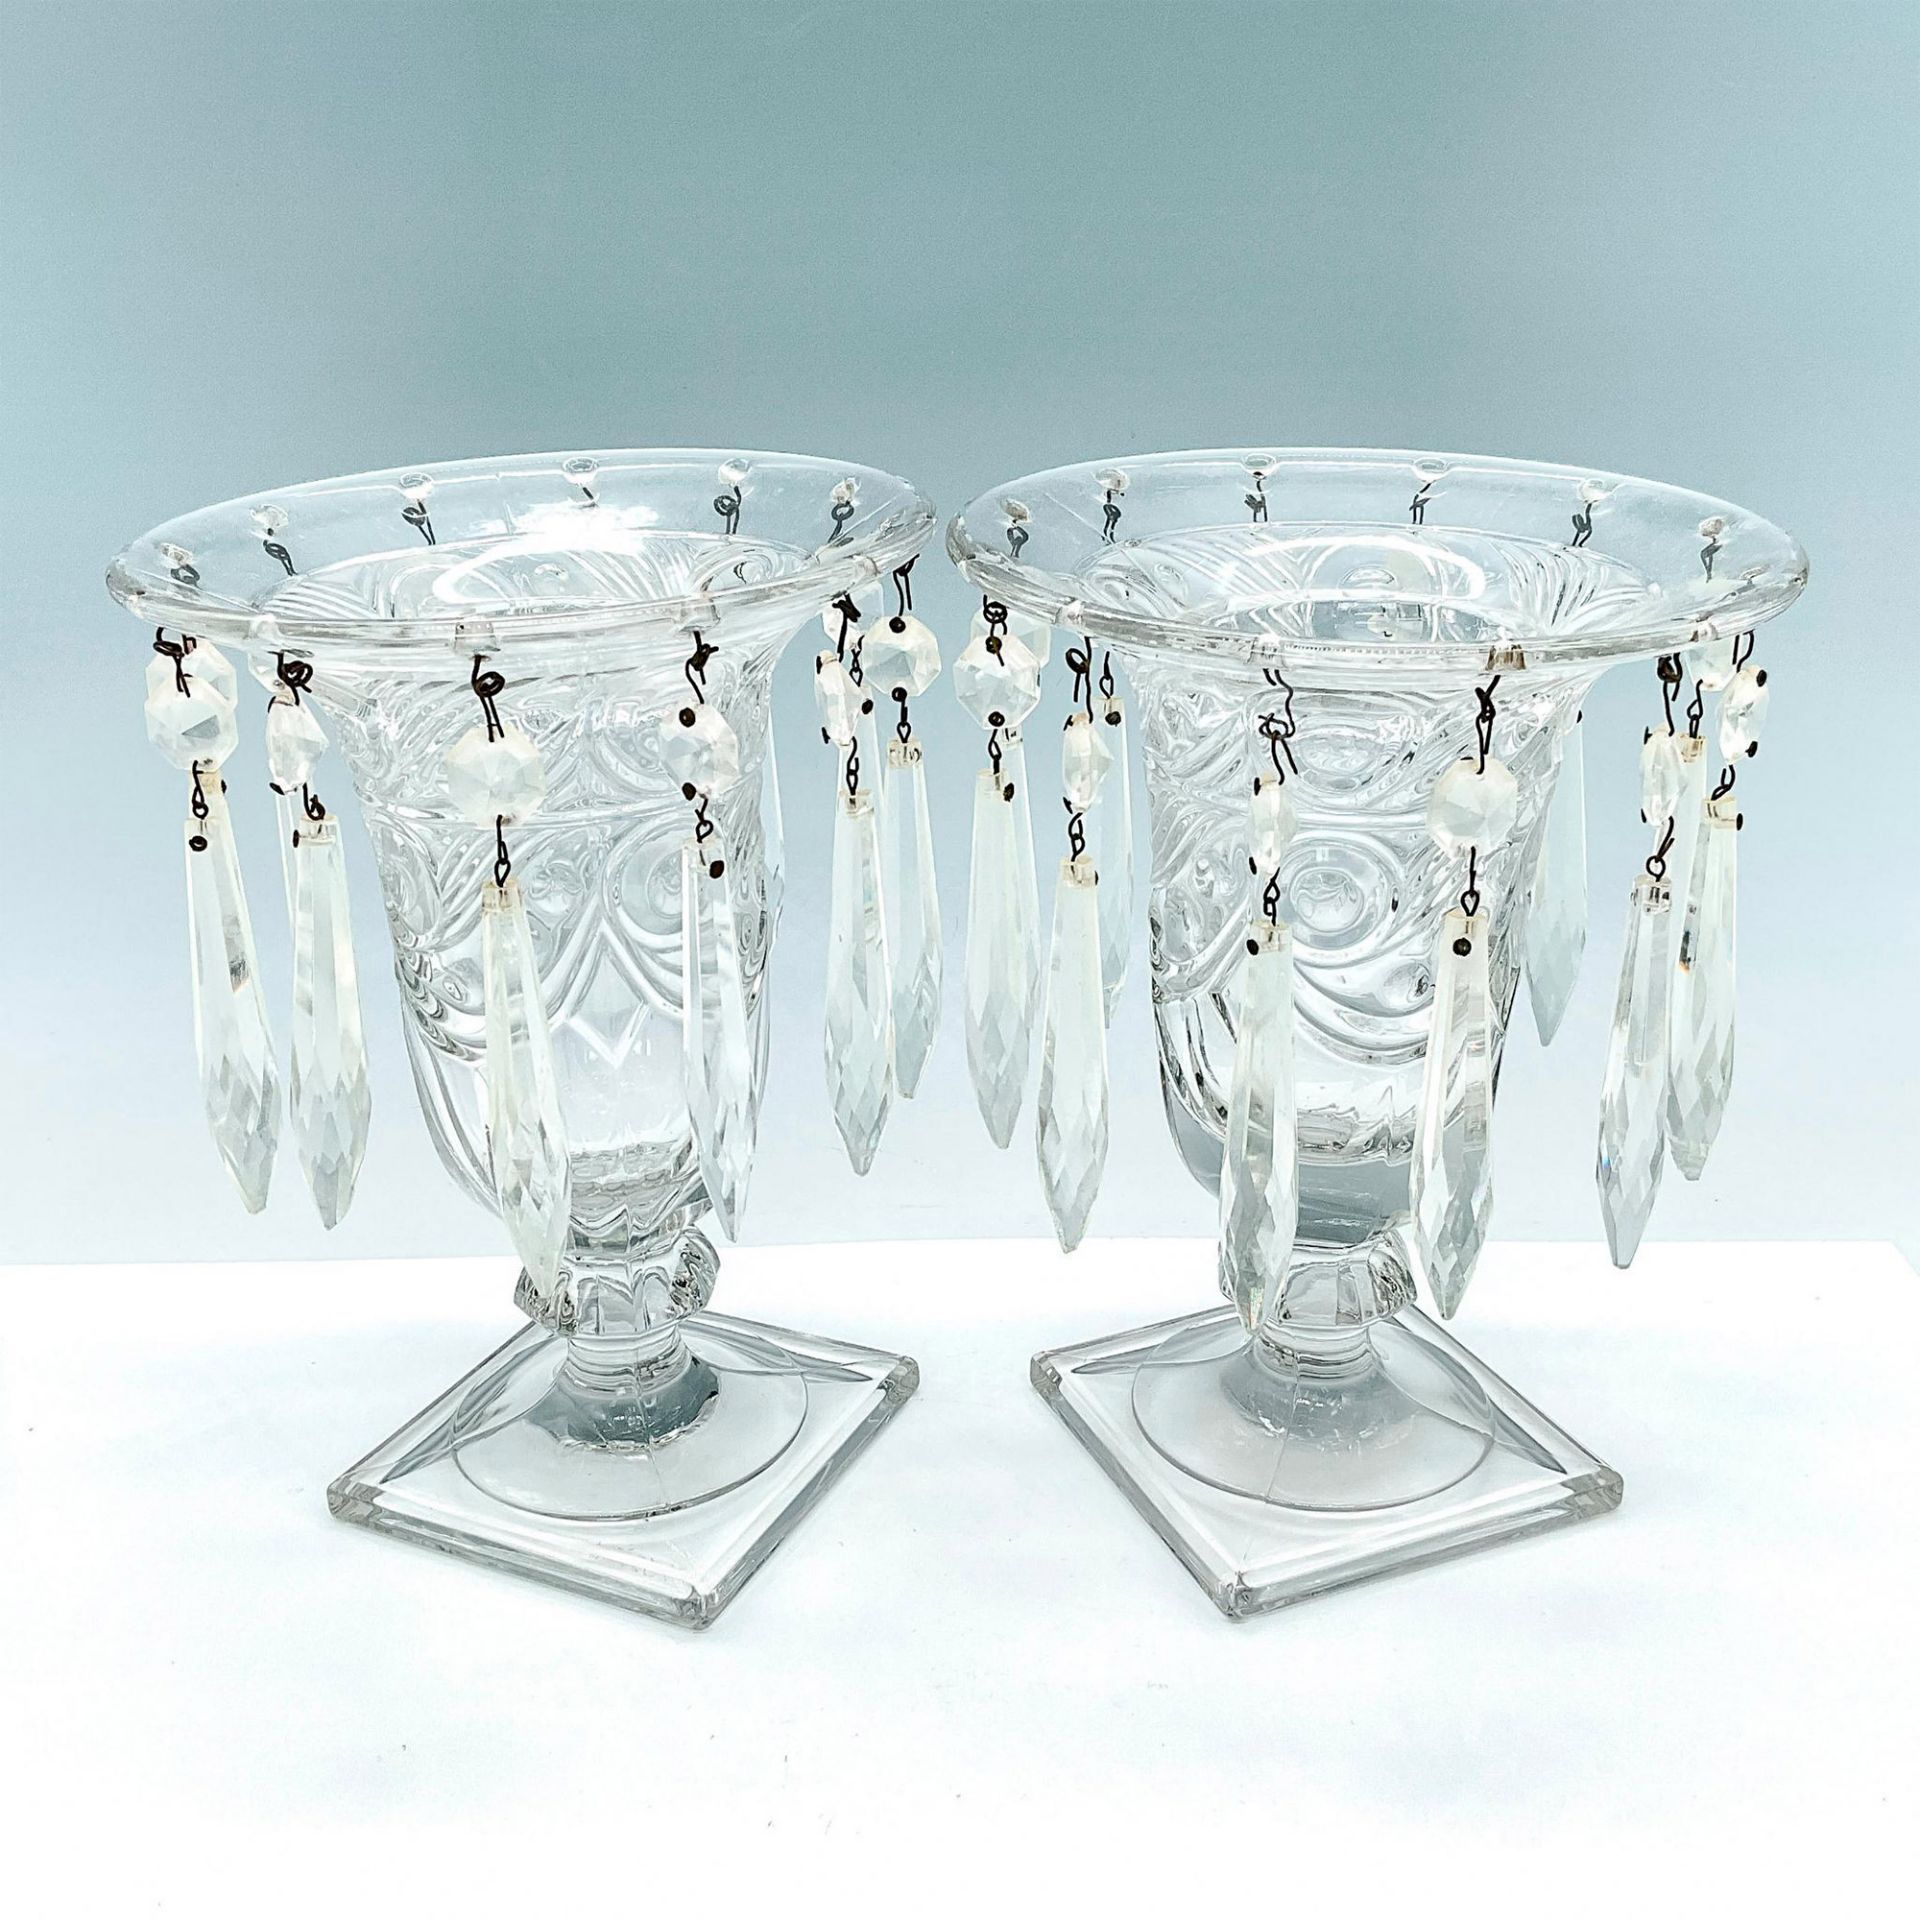 Pair of Heisey Ipswich Candle Centerpiece Vase with Prisms - Image 2 of 3